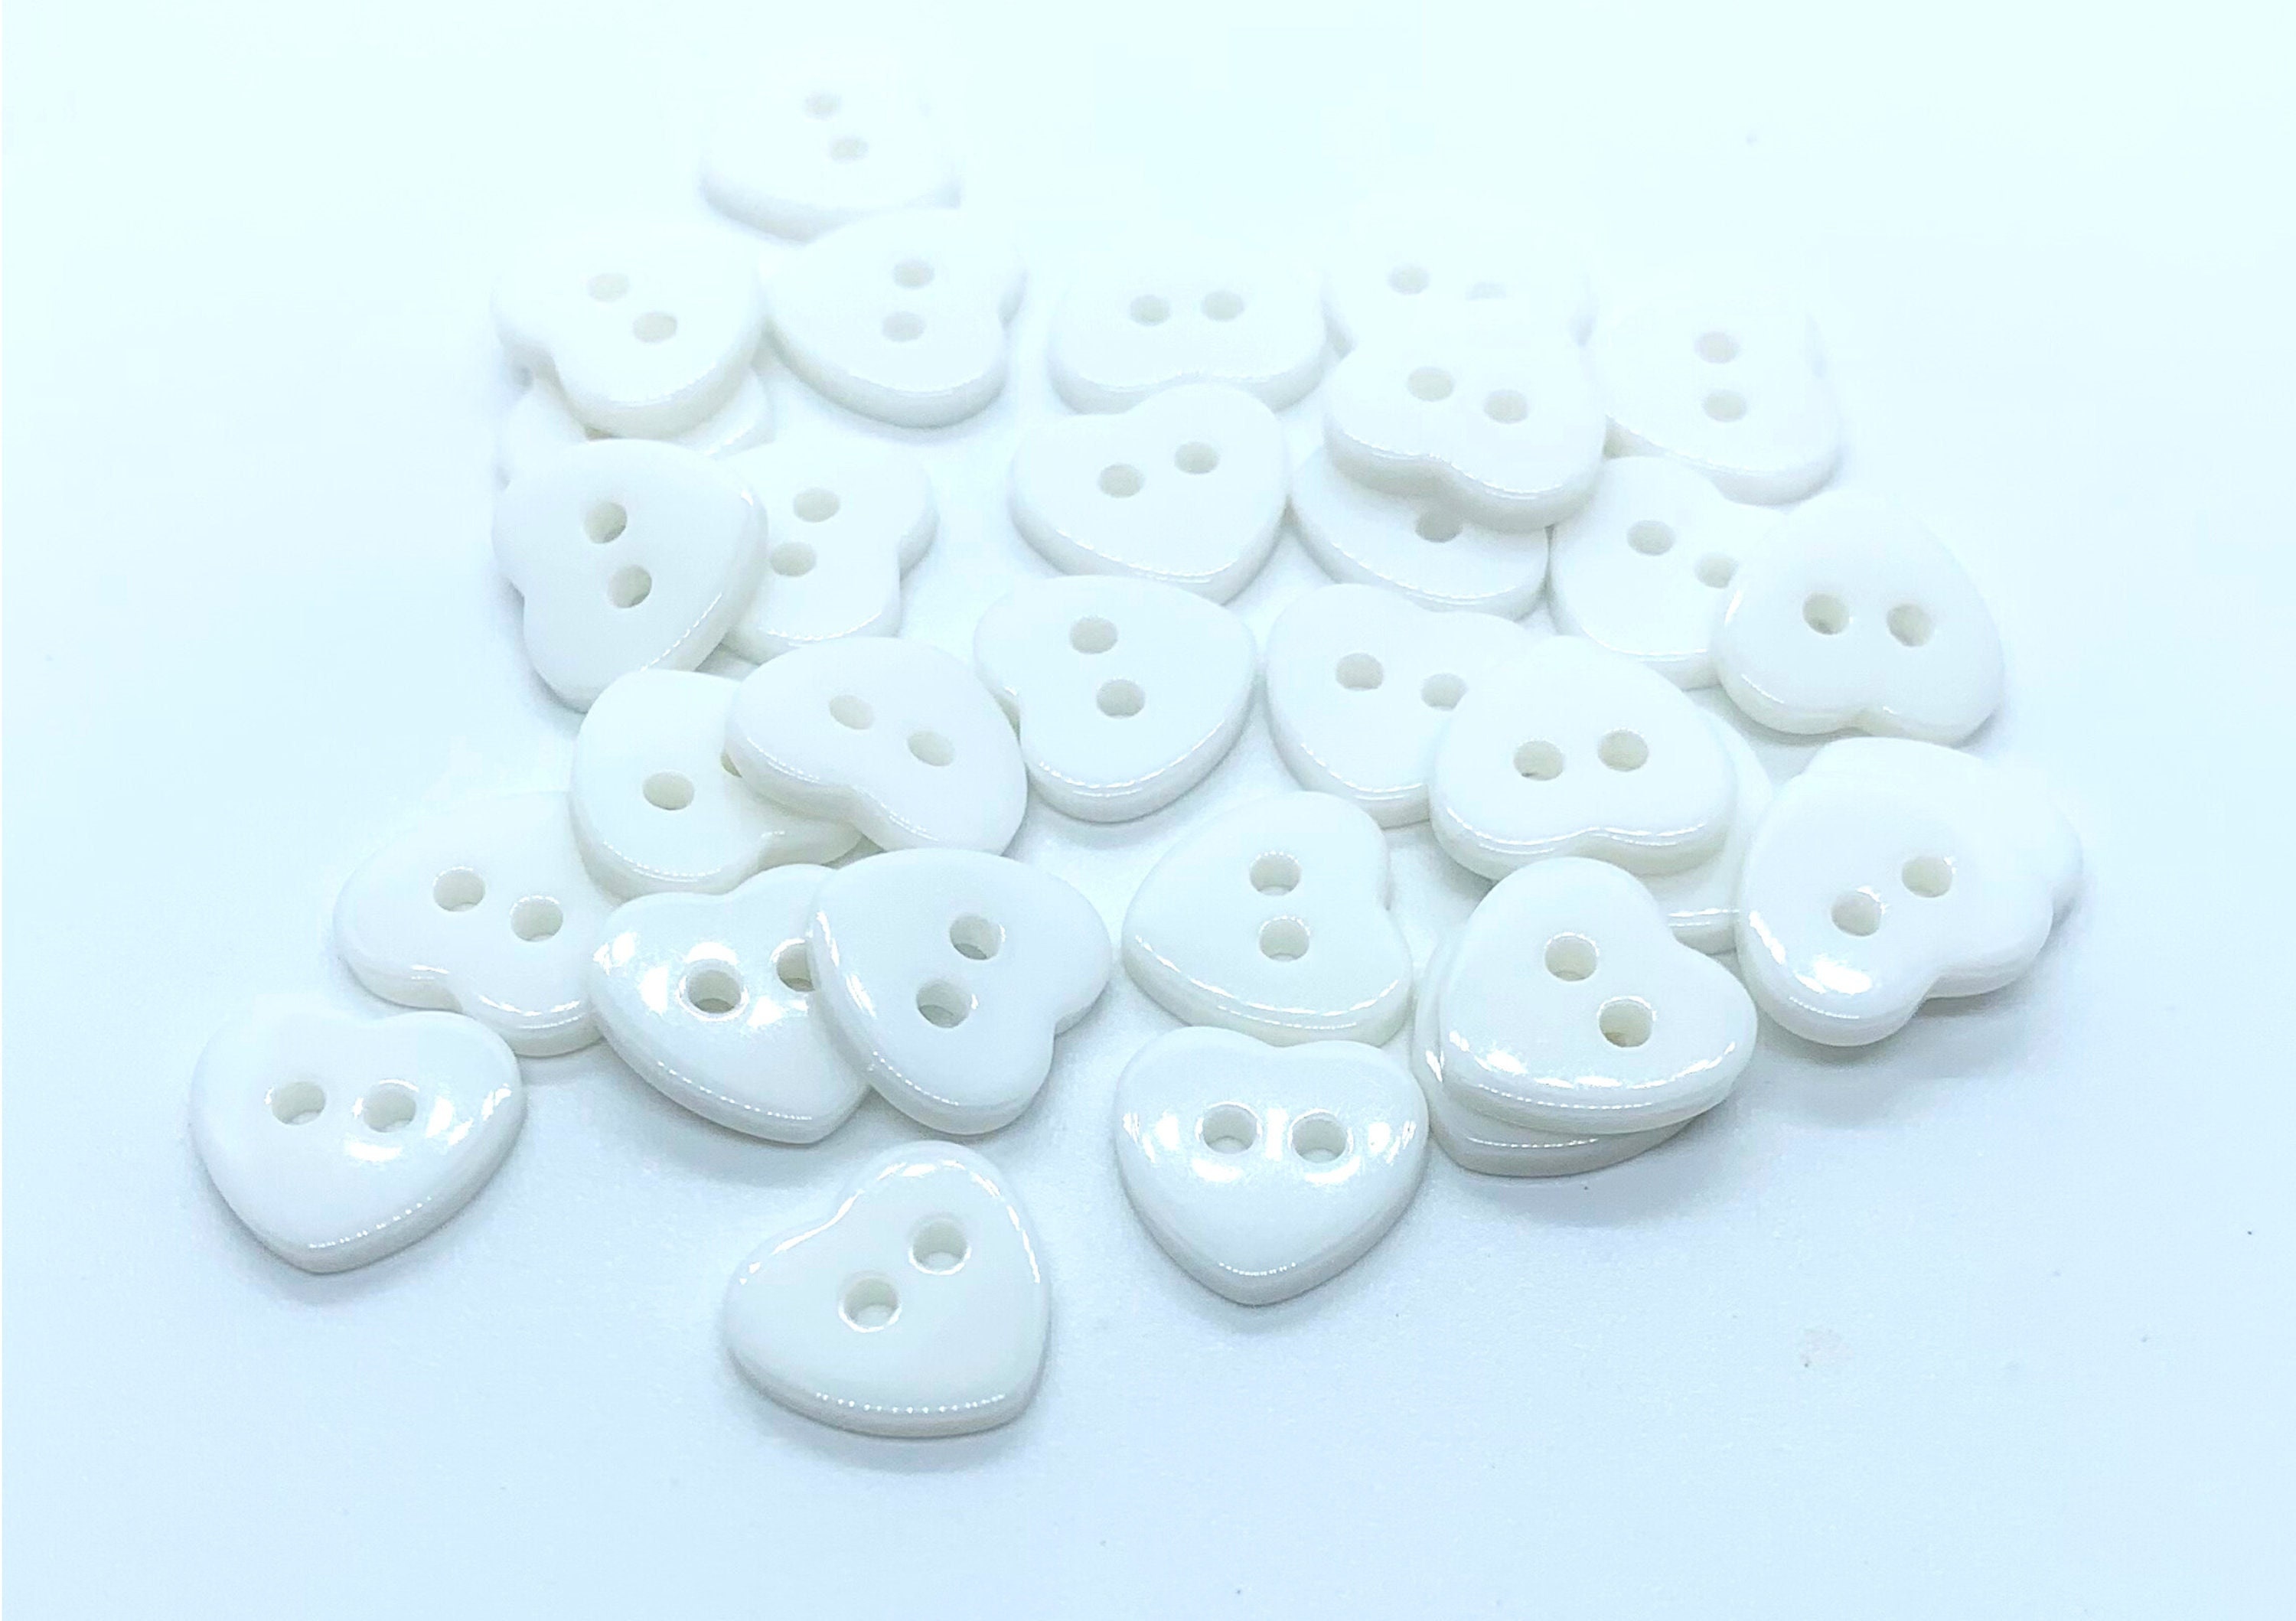 One Package (6 Buttons)Heart Shaped Vintage 4 Hole Buttons. F1310 size is  24L or 15mm or 5/8